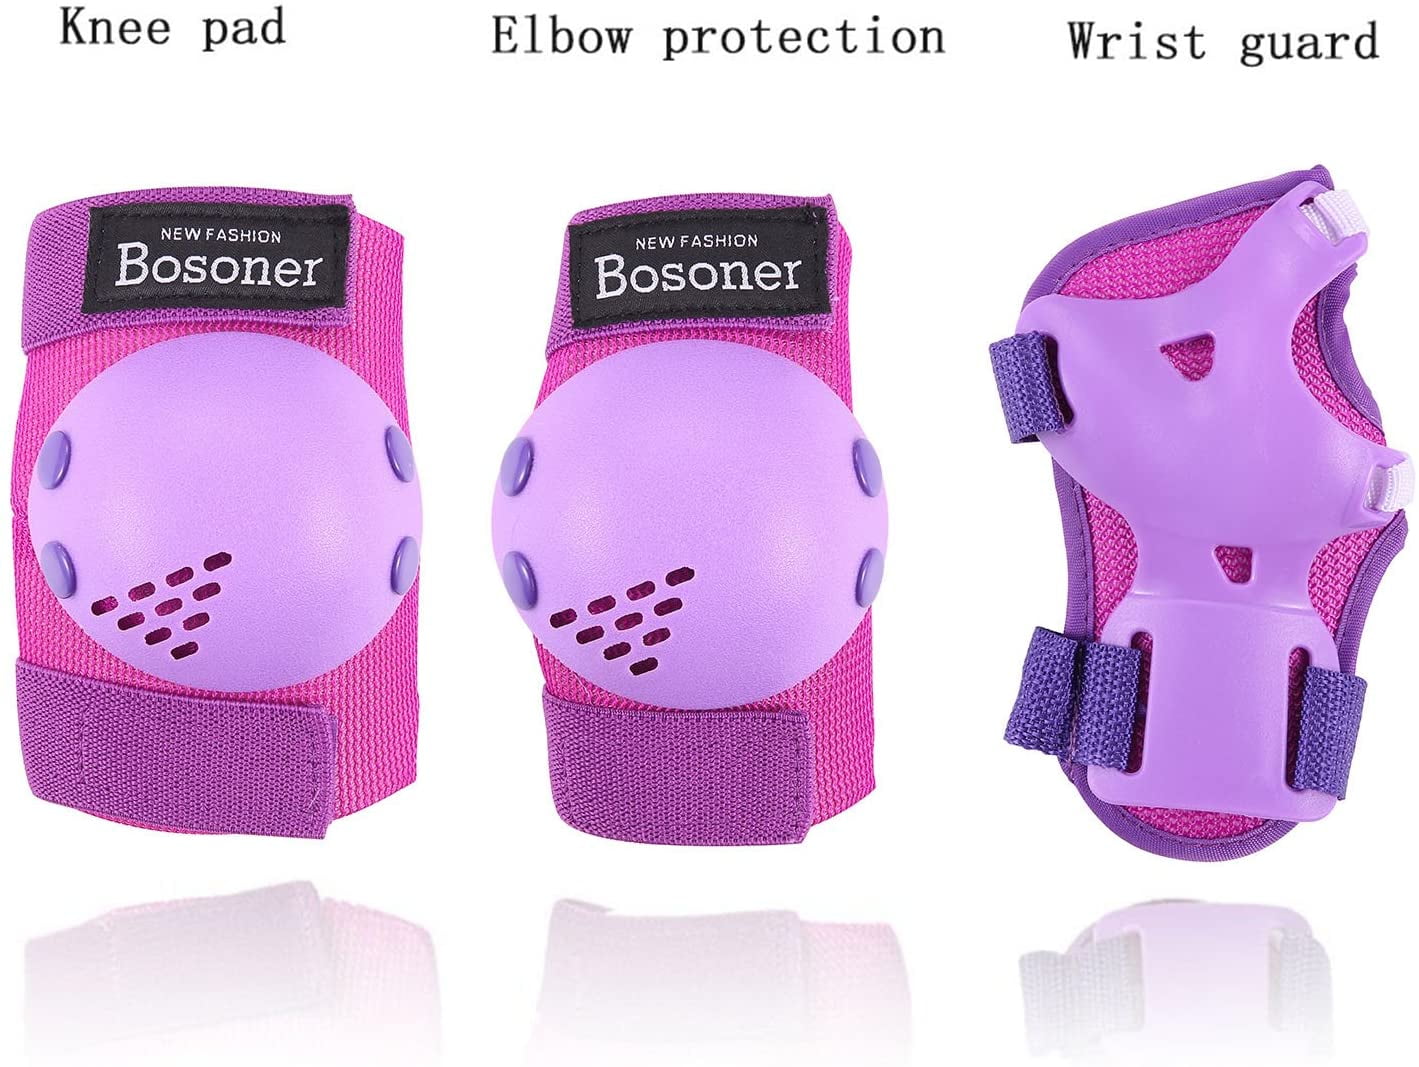 Soft Knee Pad Elbow Pads with Bike Gloves Toddler Safety Protective Gear Set for Roller Skates Cycling BMX Bike Skateboard Inline Skatings Scooter Riding Sports Knee Pads for Kids/Youth/Child 